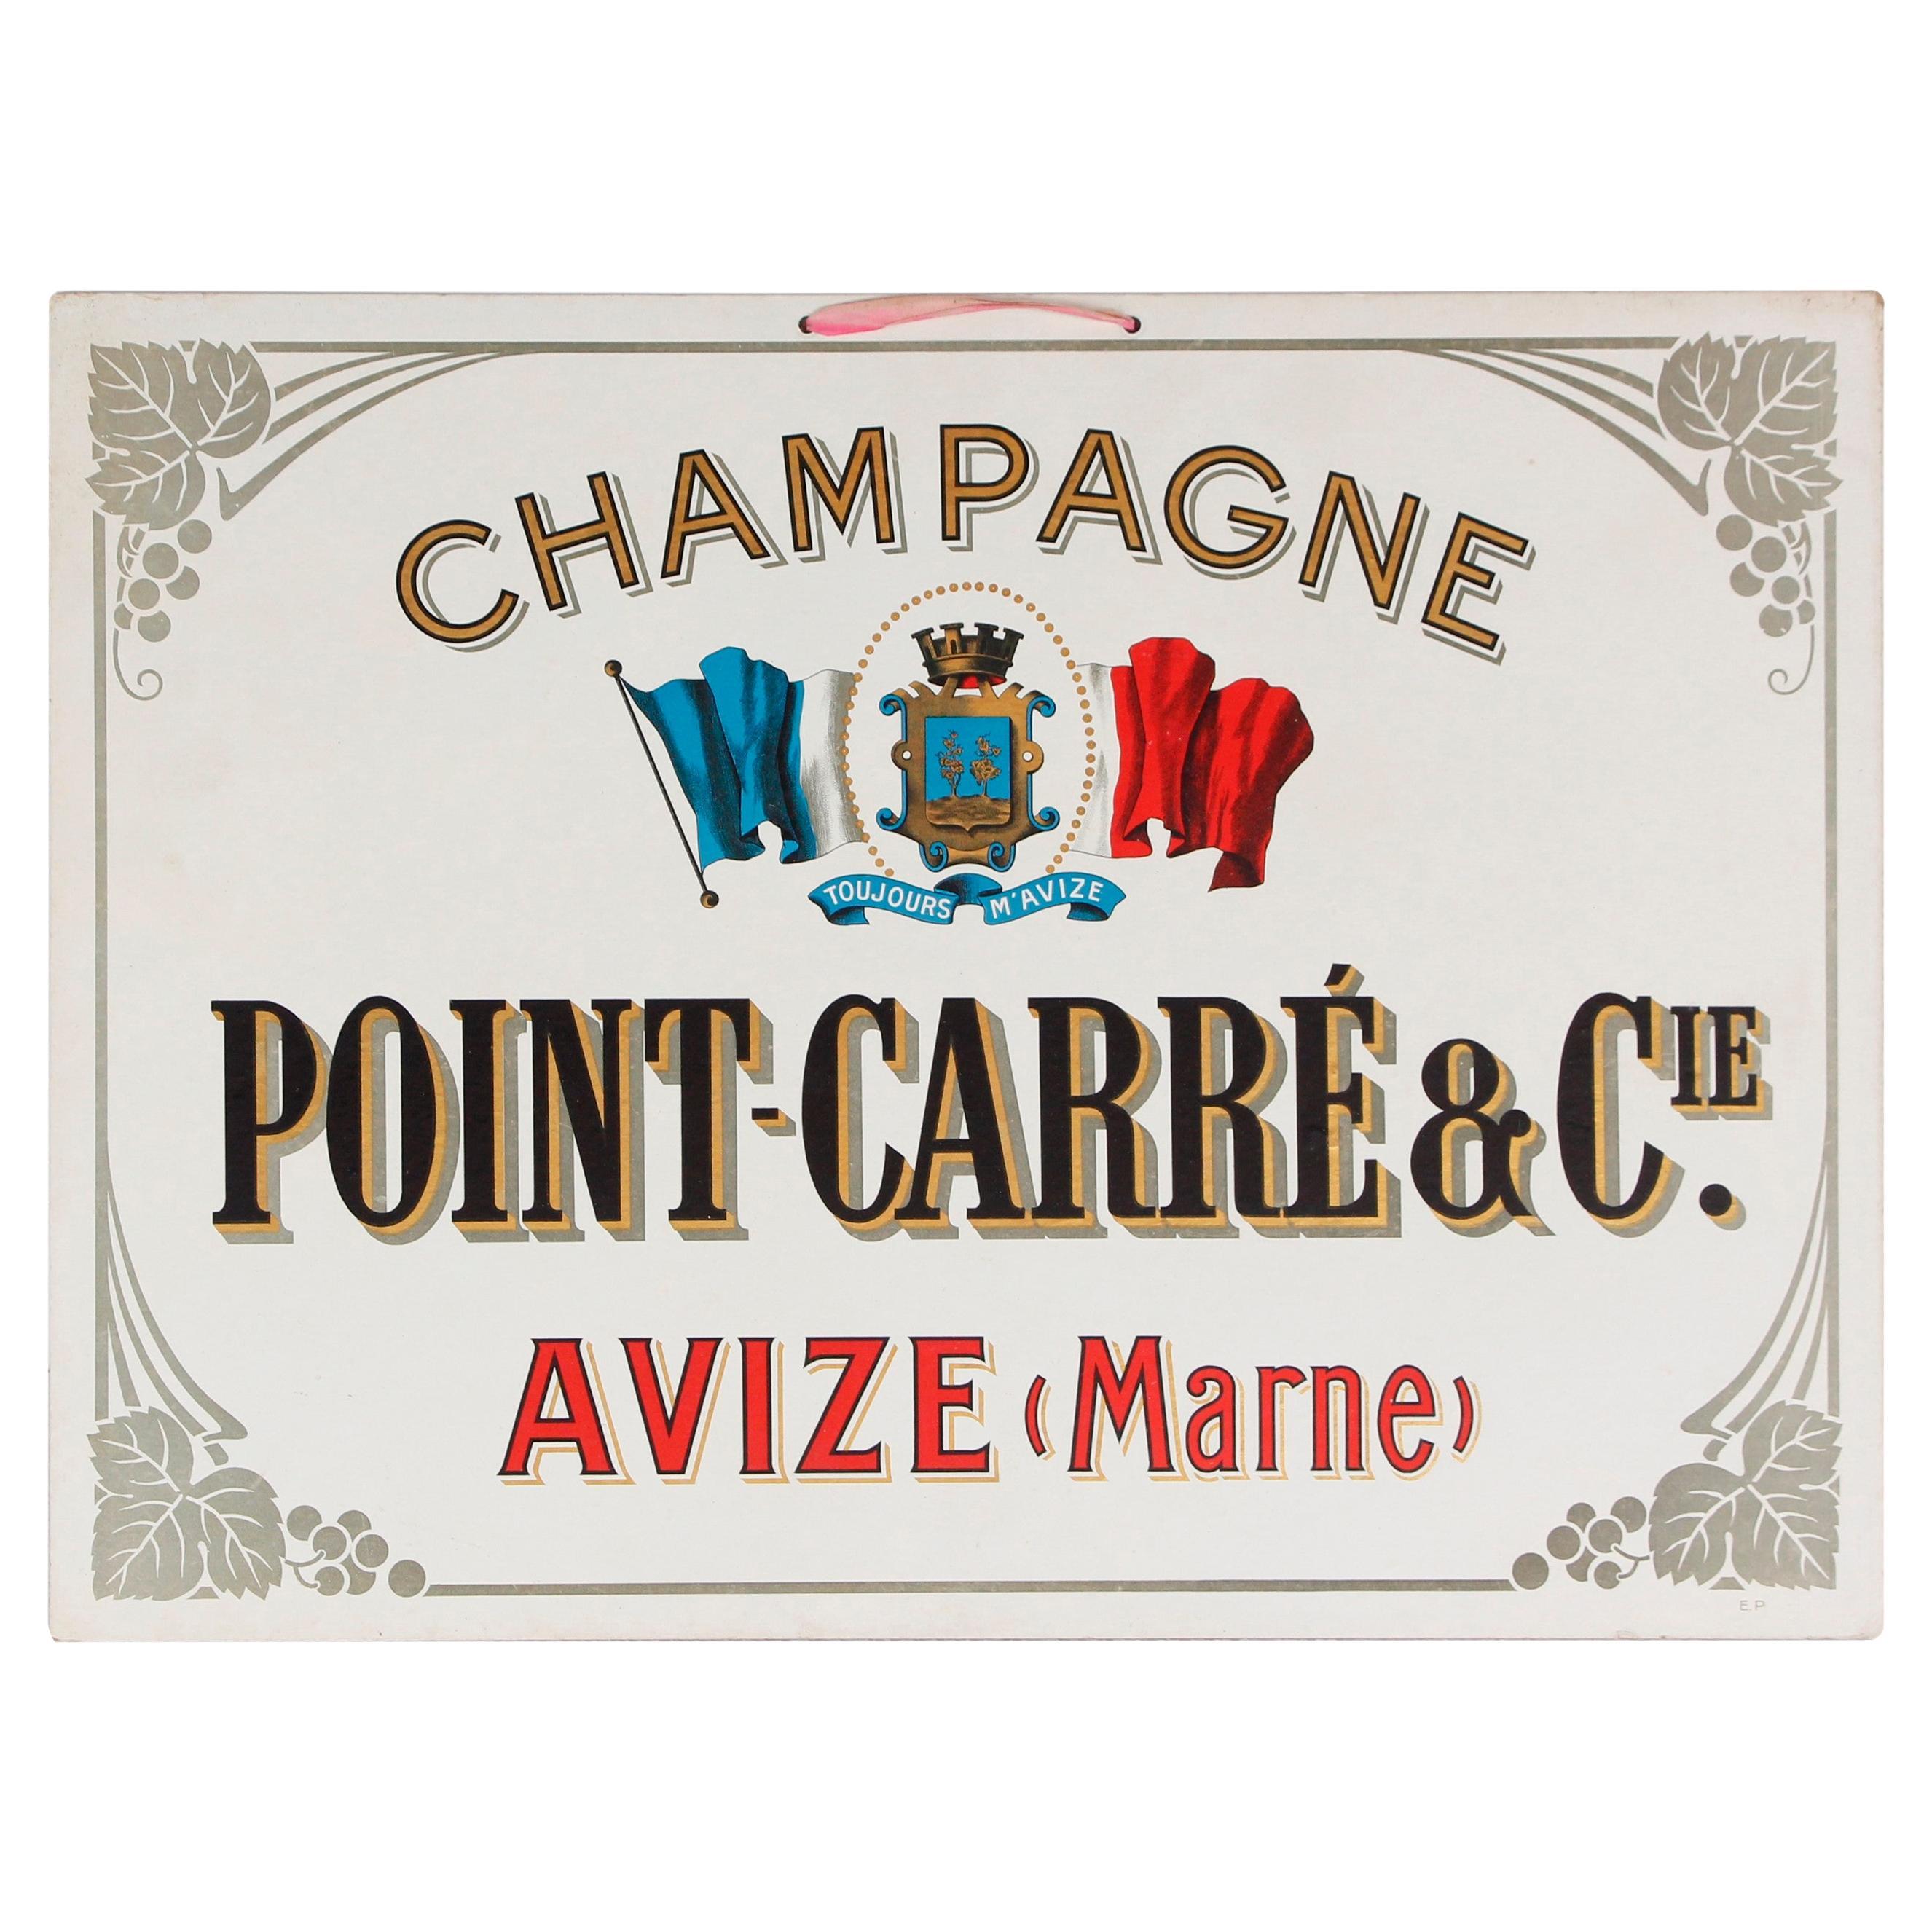 European Champagne Point Carre & C. Sign